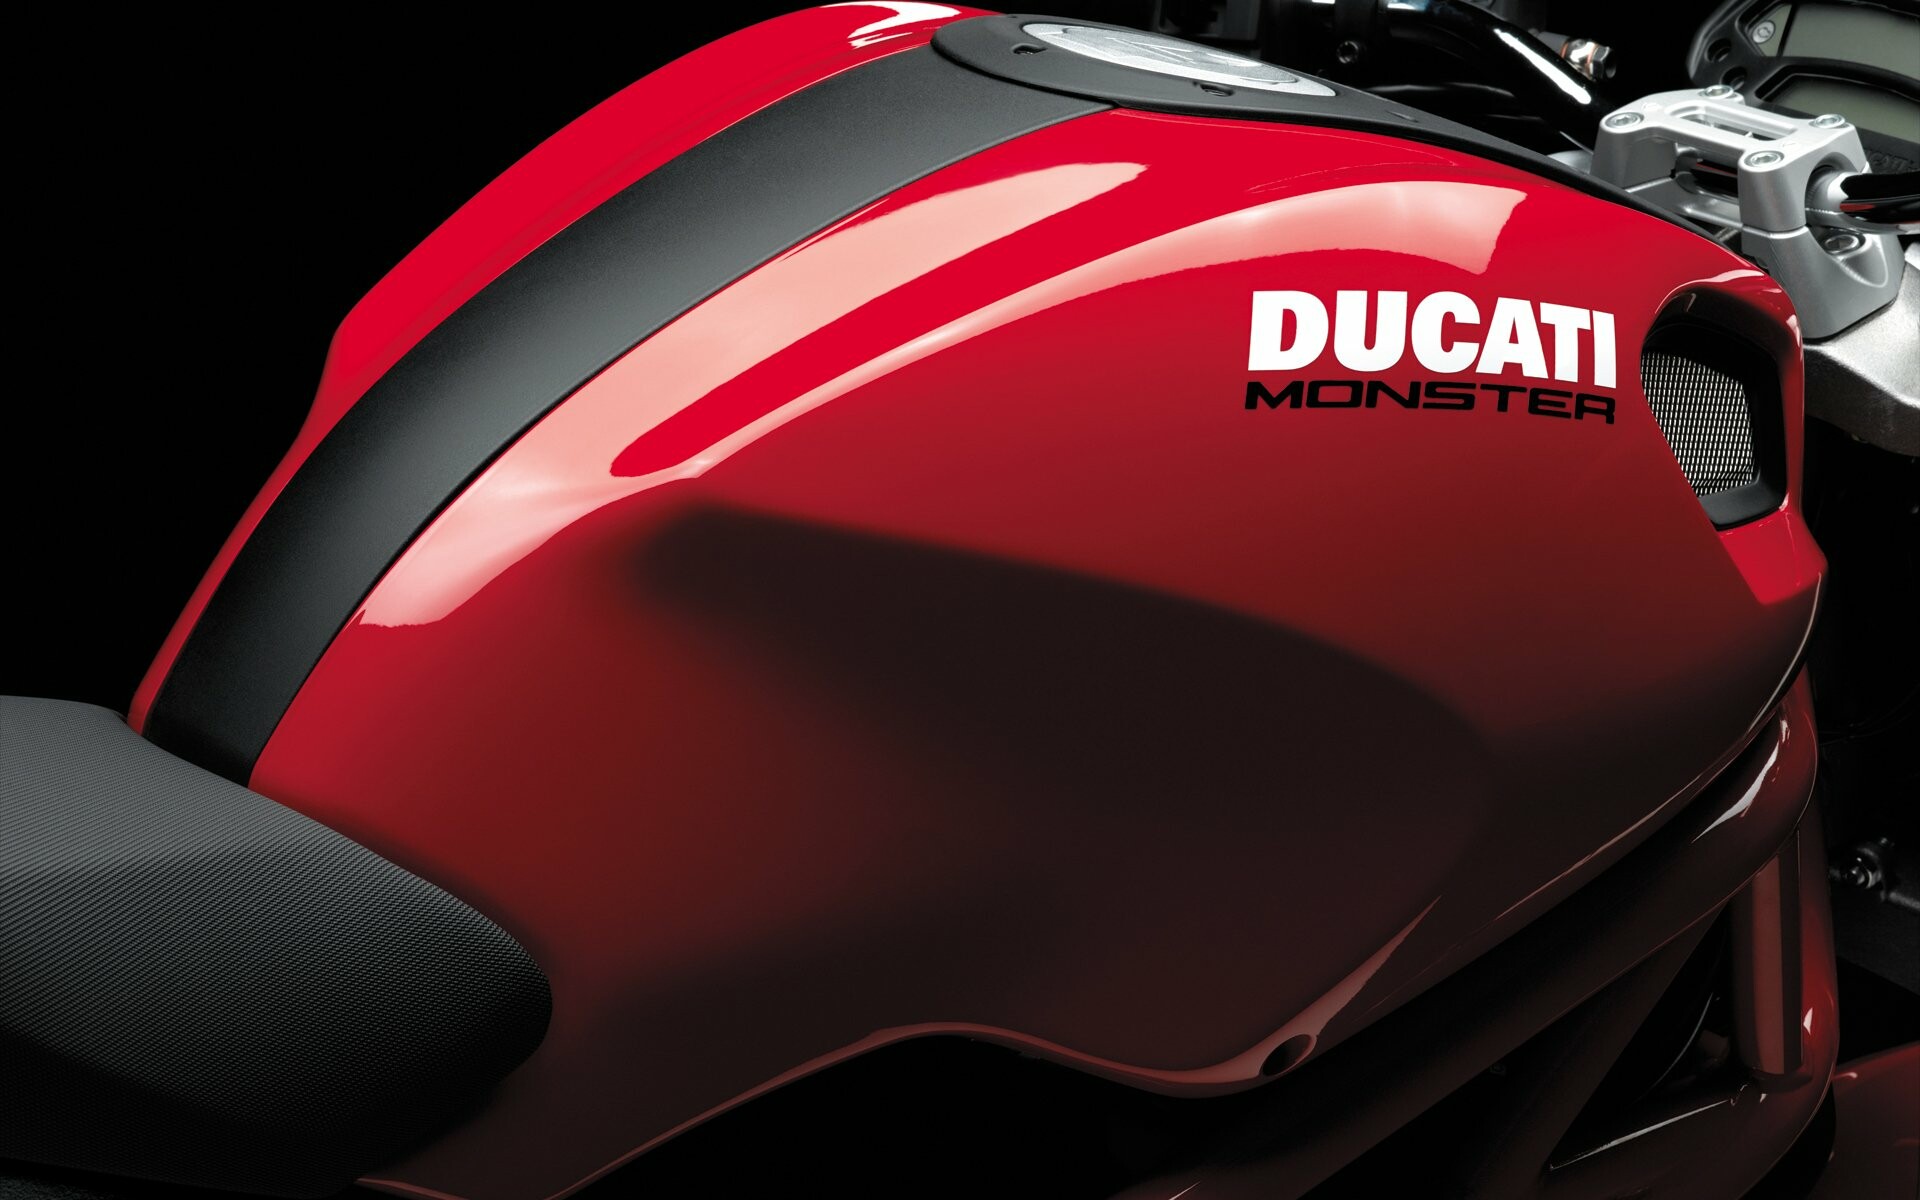 Ducati: Monster, The company's liquid-cooled, multi-valve 90° V-twins made from 1985 on. 1920x1200 HD Wallpaper.